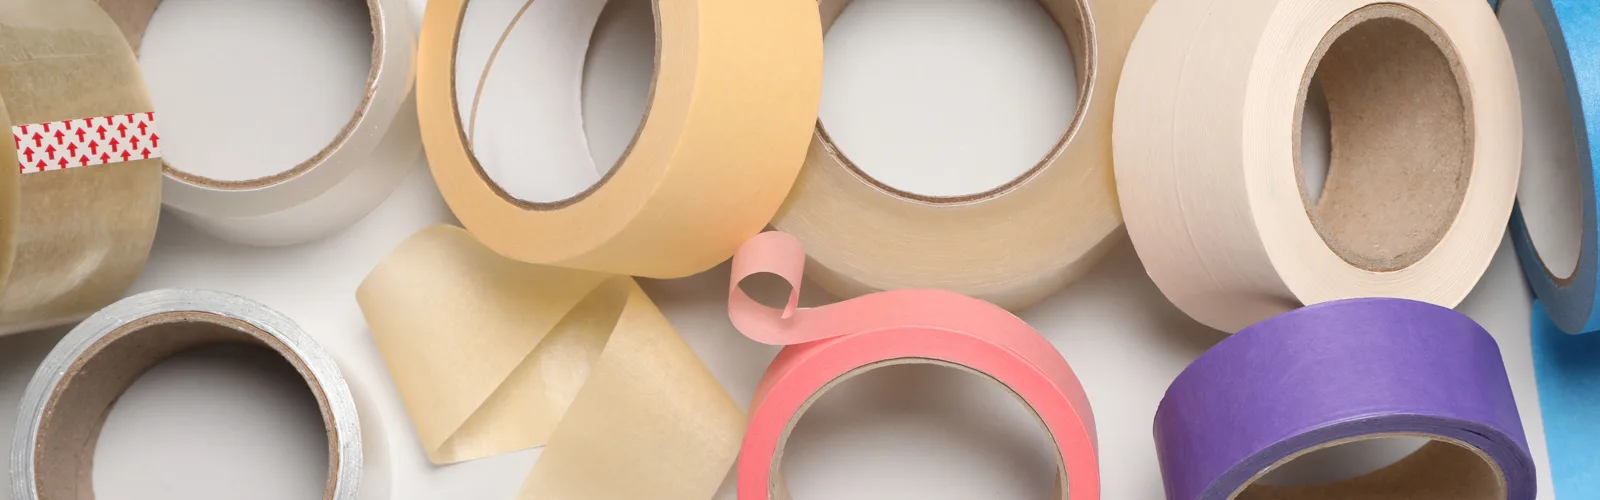 Saves Nails Double-sided Adhesive Tape. ​Extra strong double sided,  water-resistant adhesive tape for interior or exterior use.